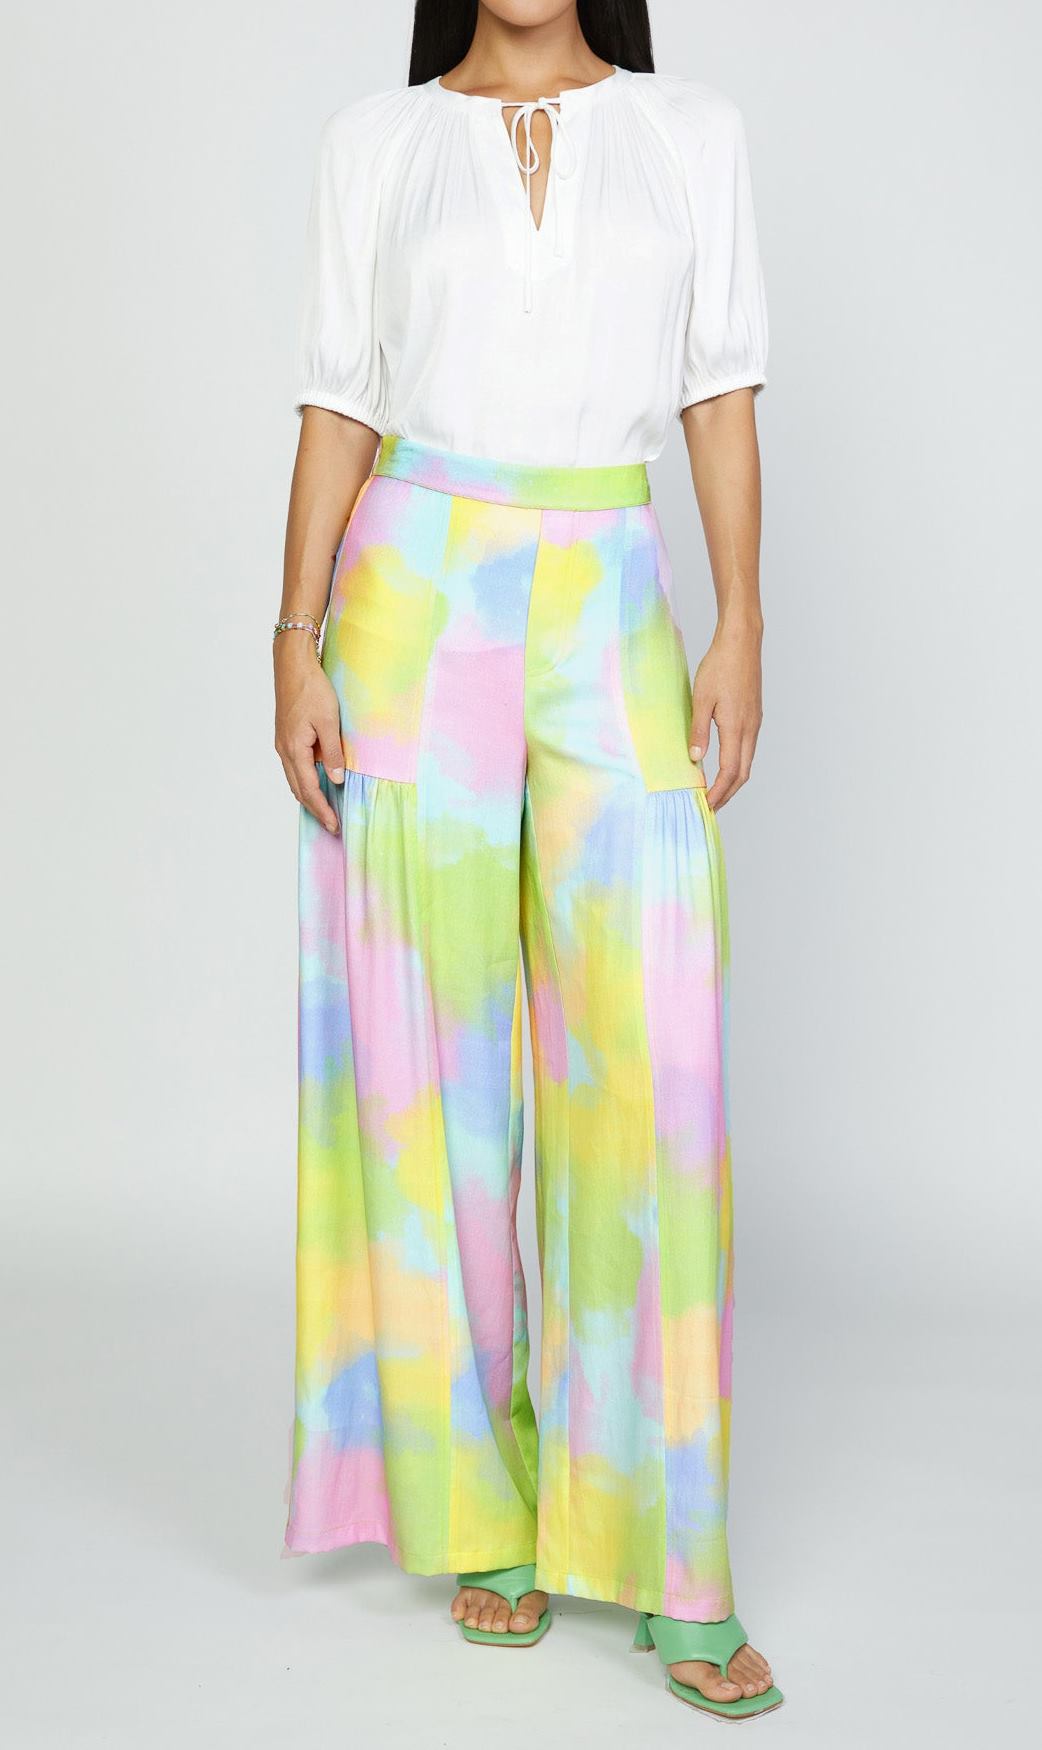 Current Air -Candy Tiered Wide Leg Pants  FINAL SALE ITEM!